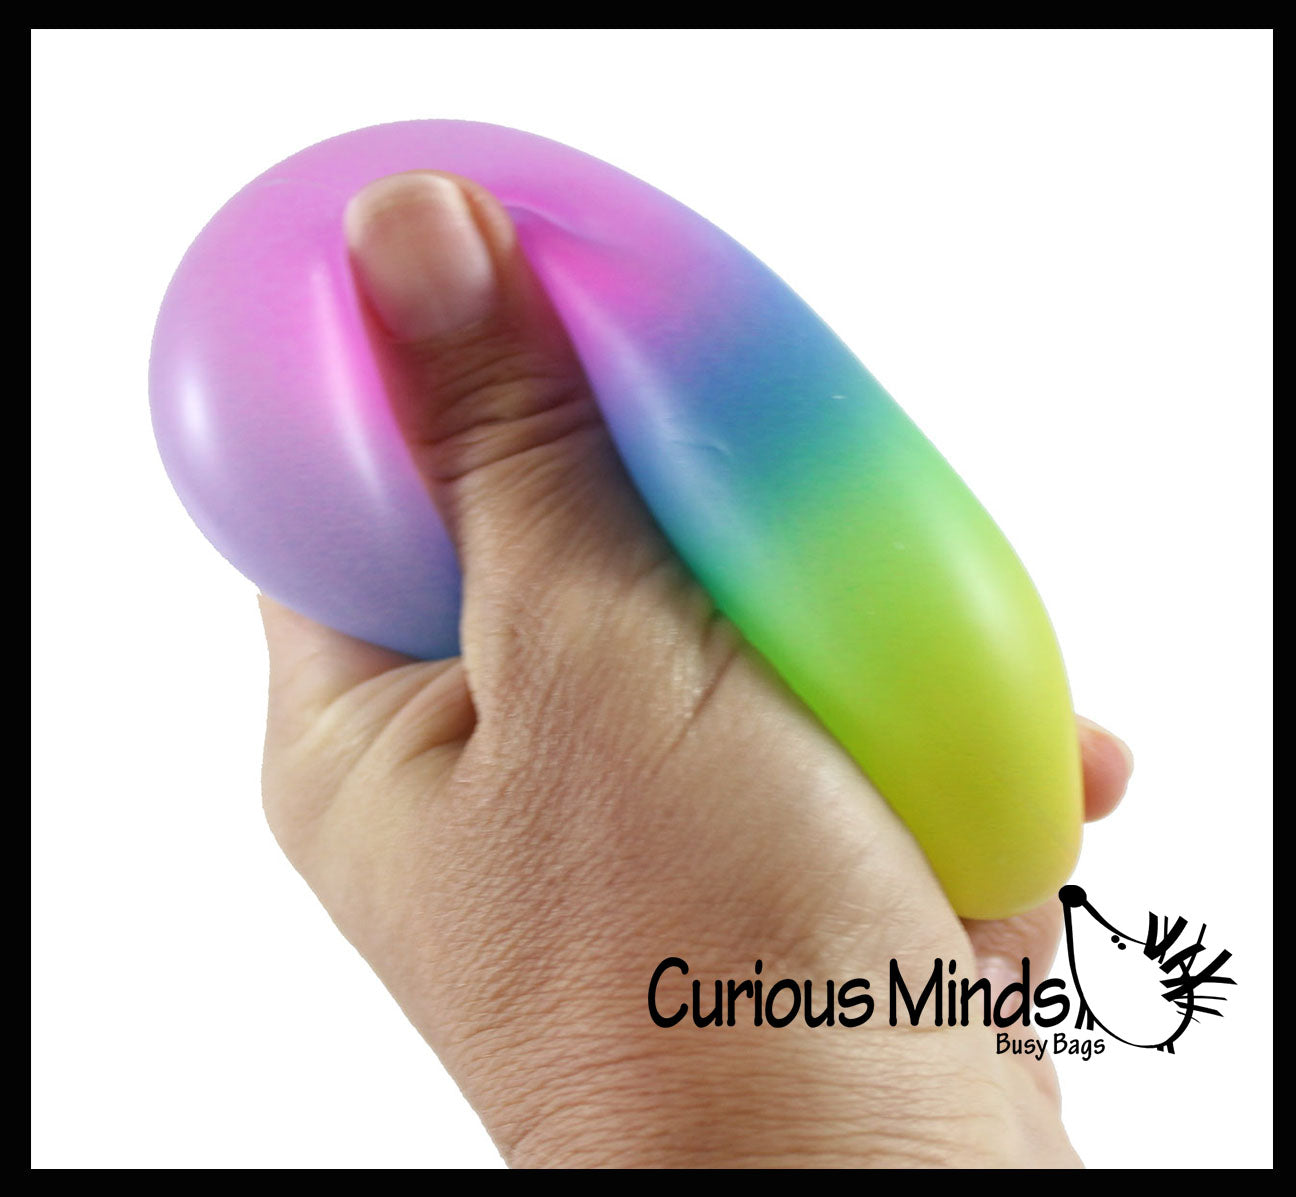 Rainbow Sugar Ball - Thick Glue/Gel Syrup Molasses Stretch Ball - Ultra Squishy and Moldable Slow Rise Relaxing Sensory Fidget Stress Toy